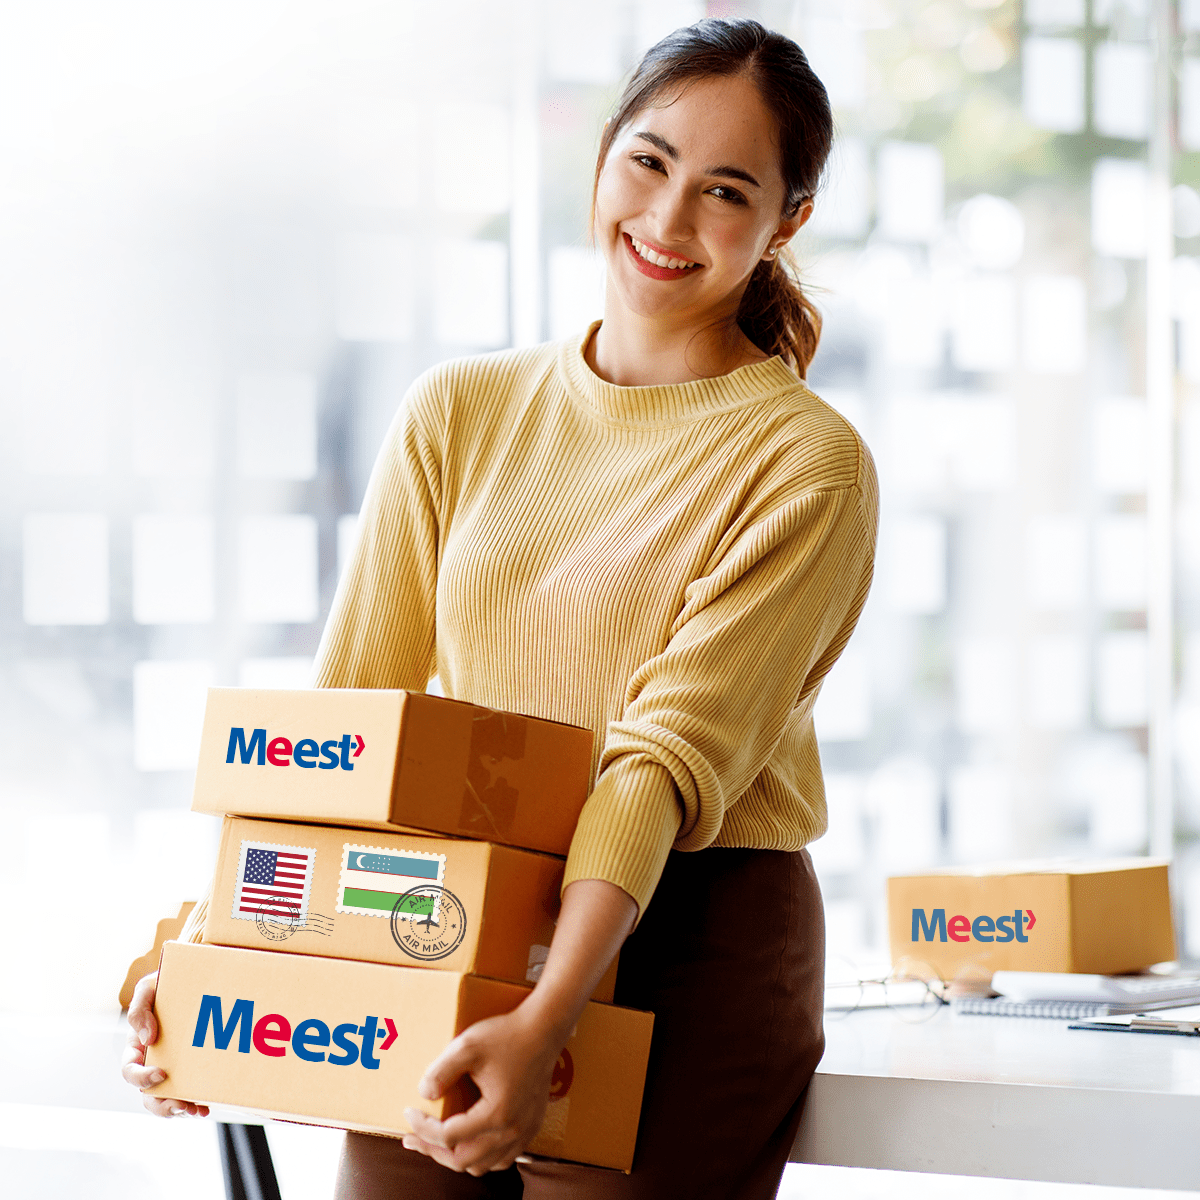 Register at Meest Portal and get a 10% discount for the first parcel shipment to Kazakhstan or Uzbekistan